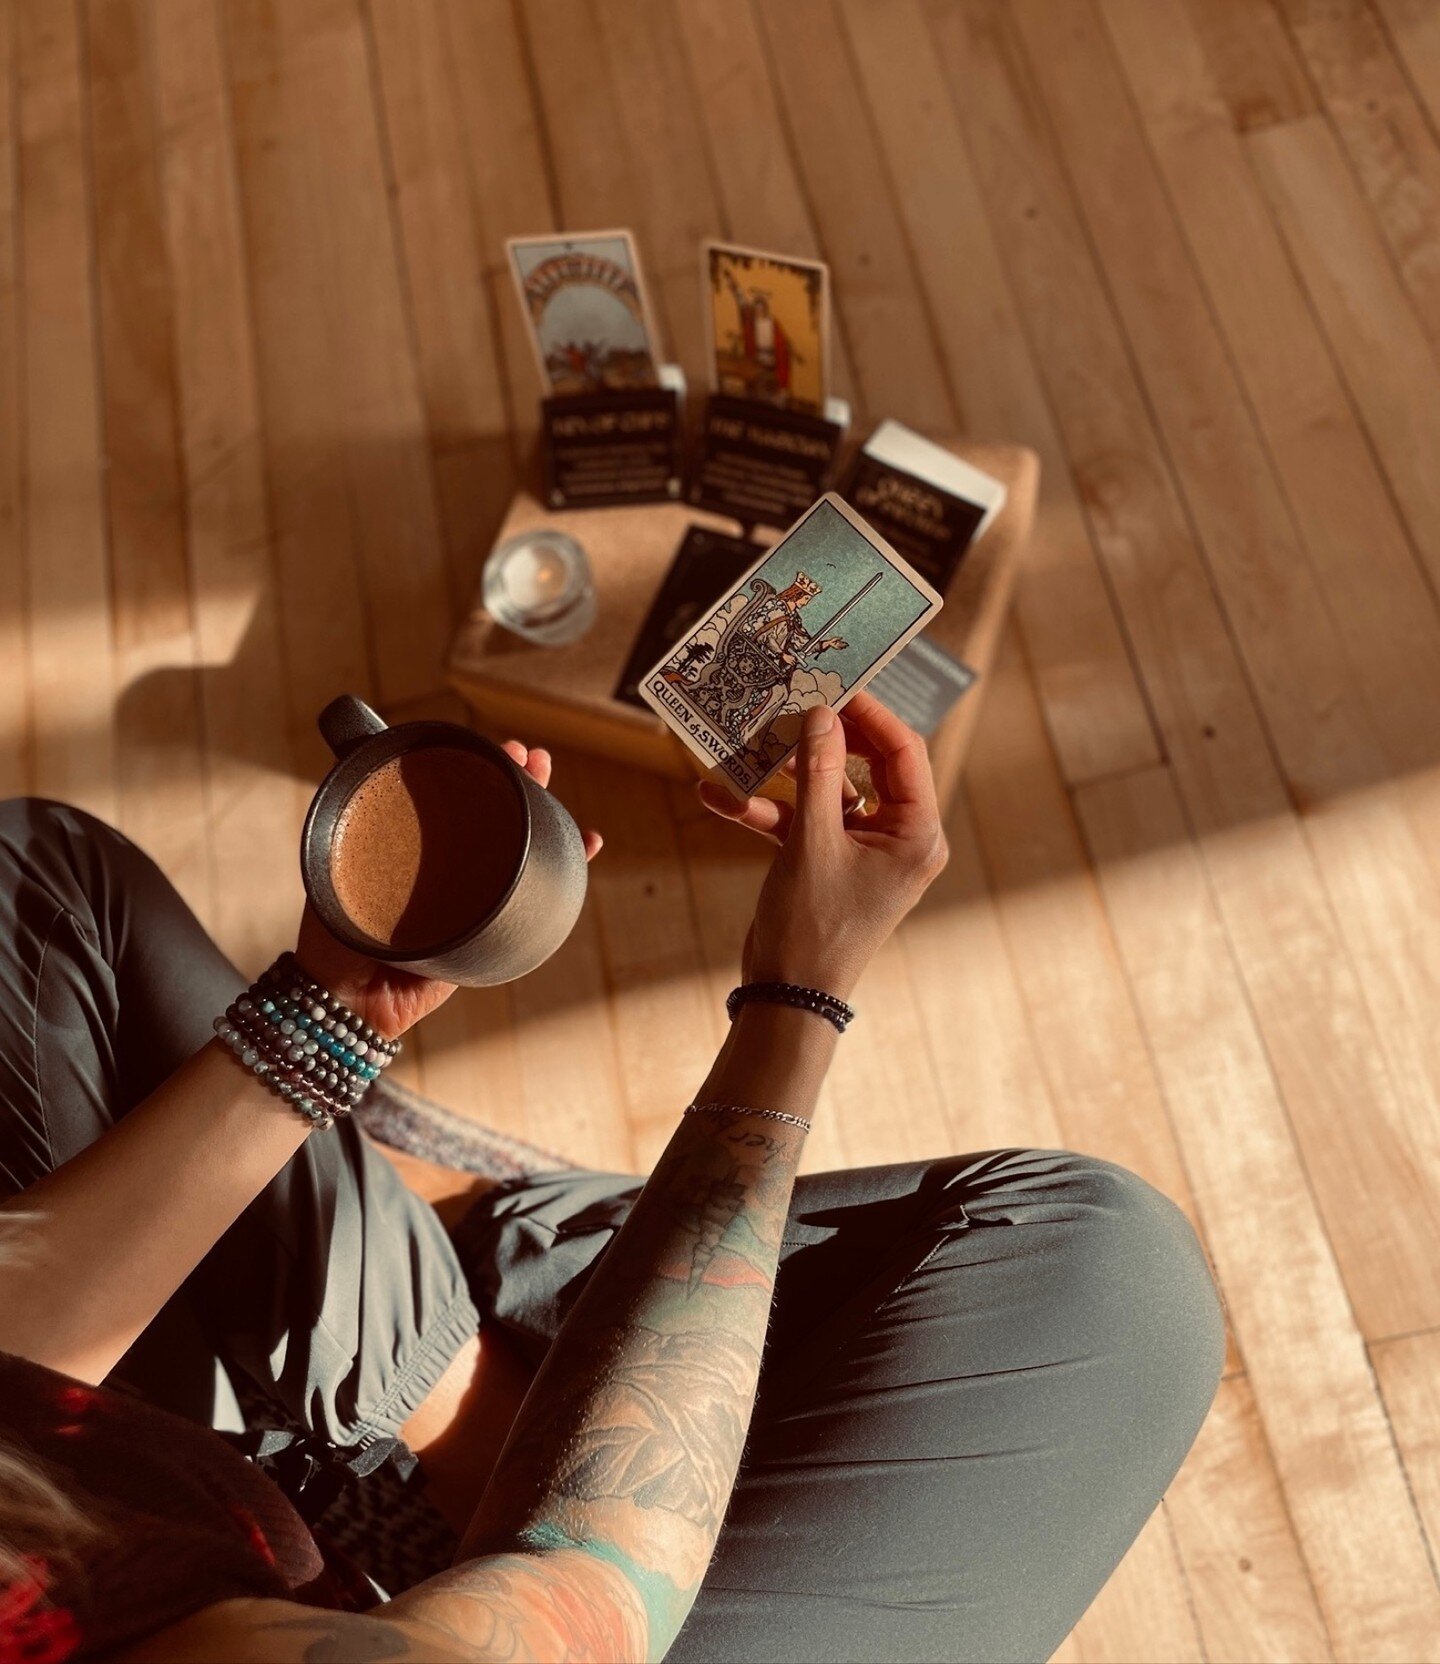 3 SPOTS LEFT!

The Tarot Experience with Cacao

Join Rachelle Barkhurst of Cosmic Heart Collective &amp; Audrey Jansen of Seek Yoga Studio @seekyoga for an intimate afternoon of tarot, cacao &amp; meditation.

🌟Begin with a cacao ceremony to open yo